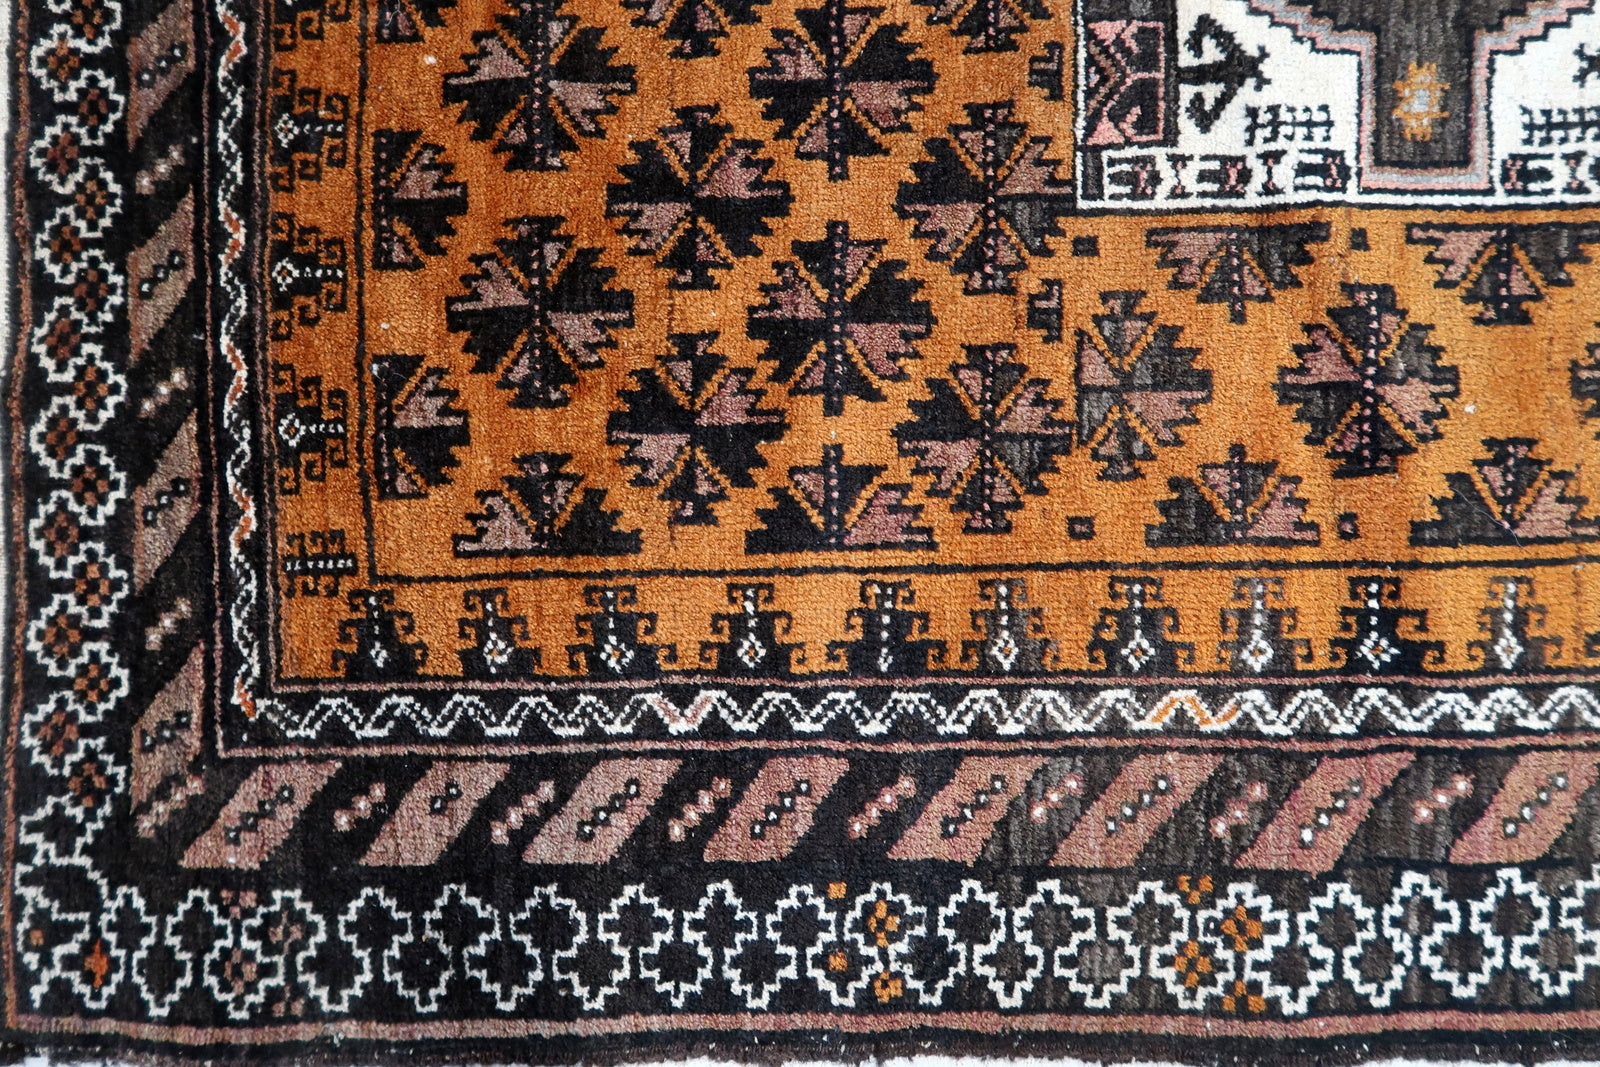  Front view of the handmade Afghan Baluch rug adding elegance to a living room